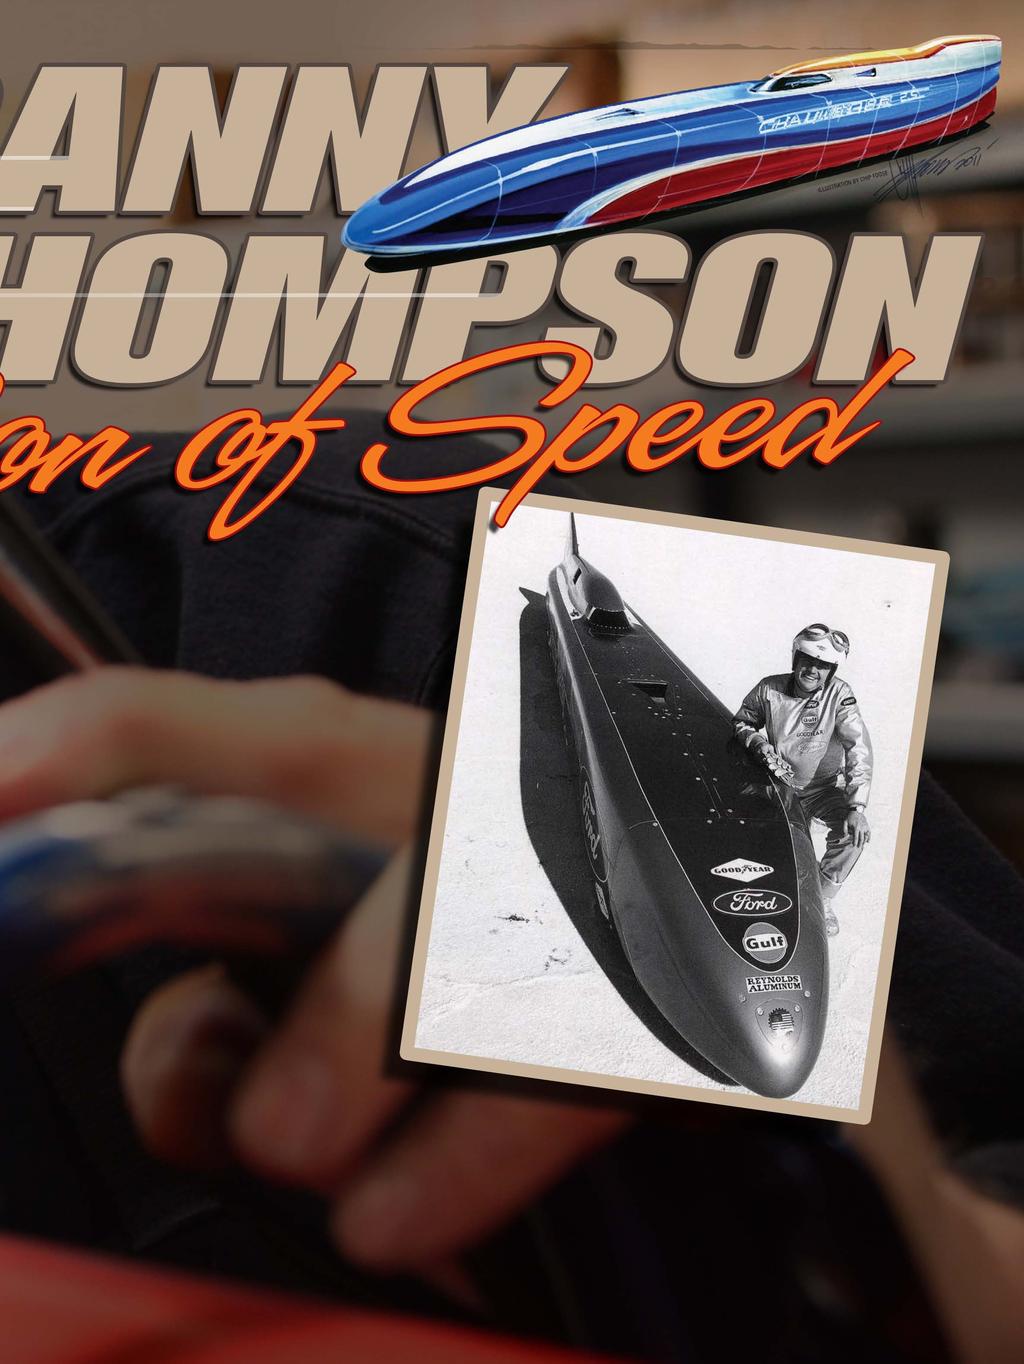 Being given the genetic desire for speed can be a blessing and a curse. For Danny Thompson, son of the legendary Speed King Mickey Thompson, it was both.